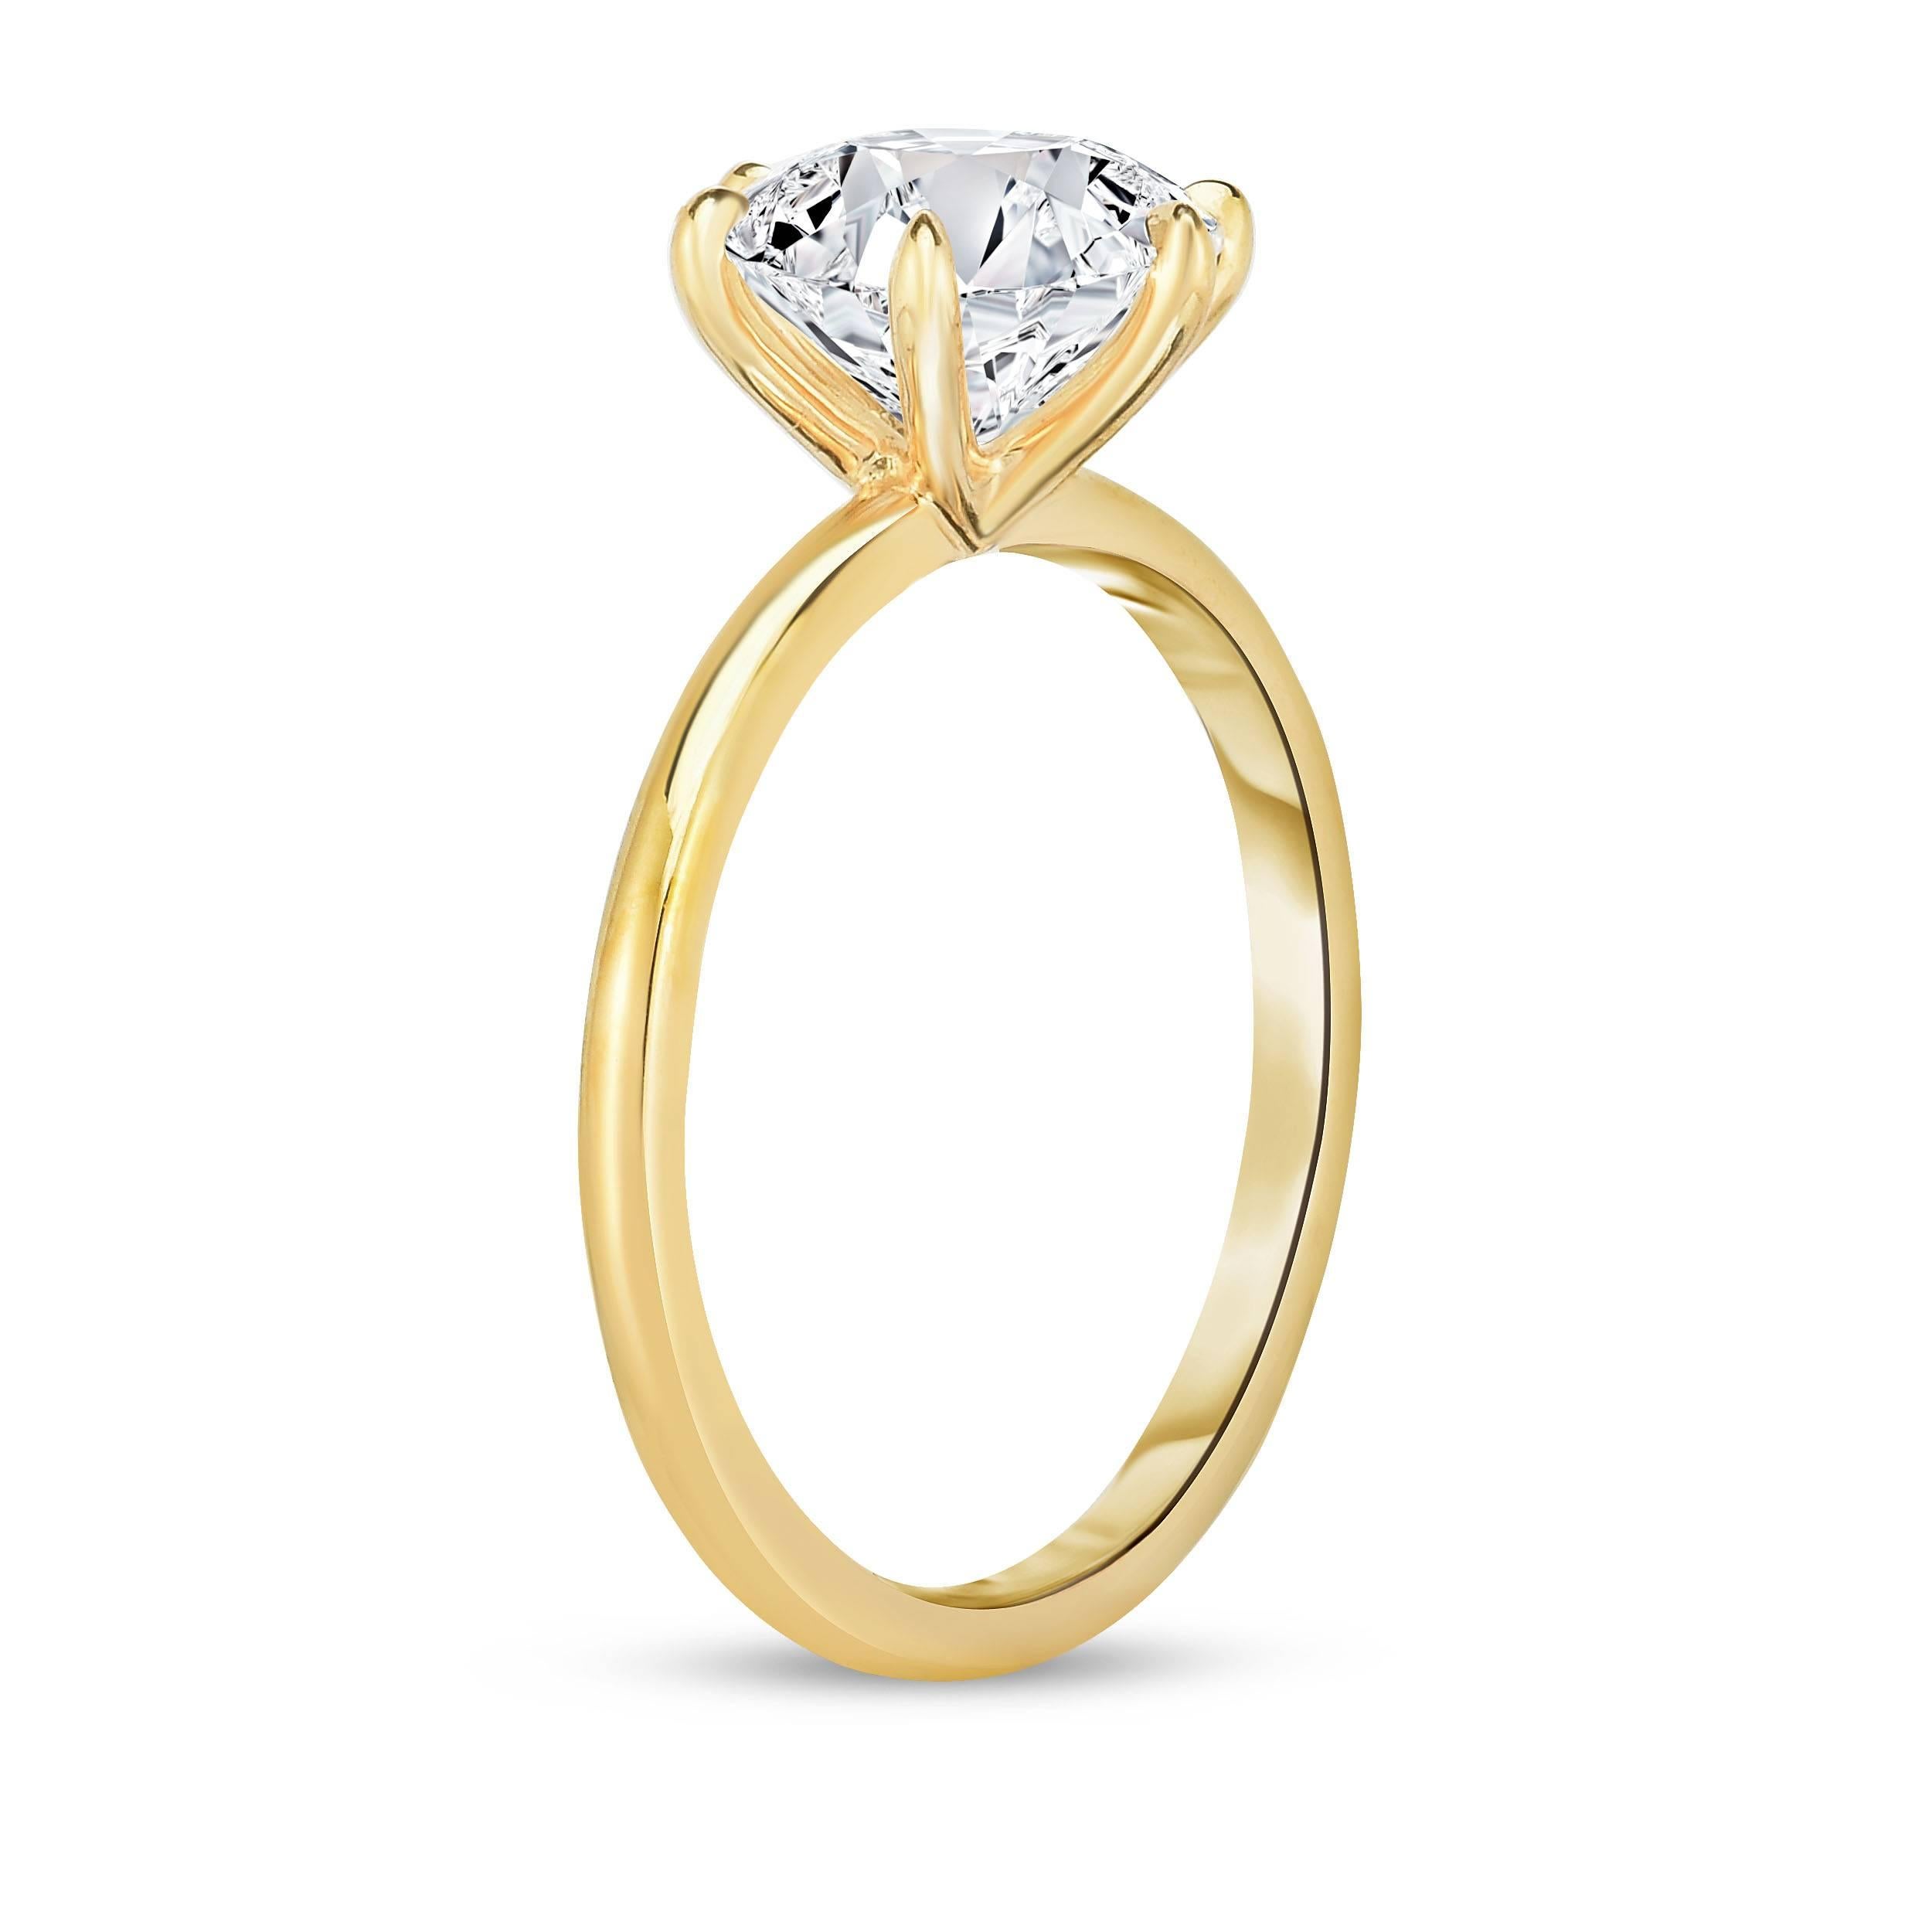 GIA certified 2.22 carat round solitaire engagement ring. The diamond is exceptionally well cut with an H color and SI1 clarity. Designed and made in New York City, set in 18k yellow gold.  

The six prong ring was designed by Haute Jewelry designer